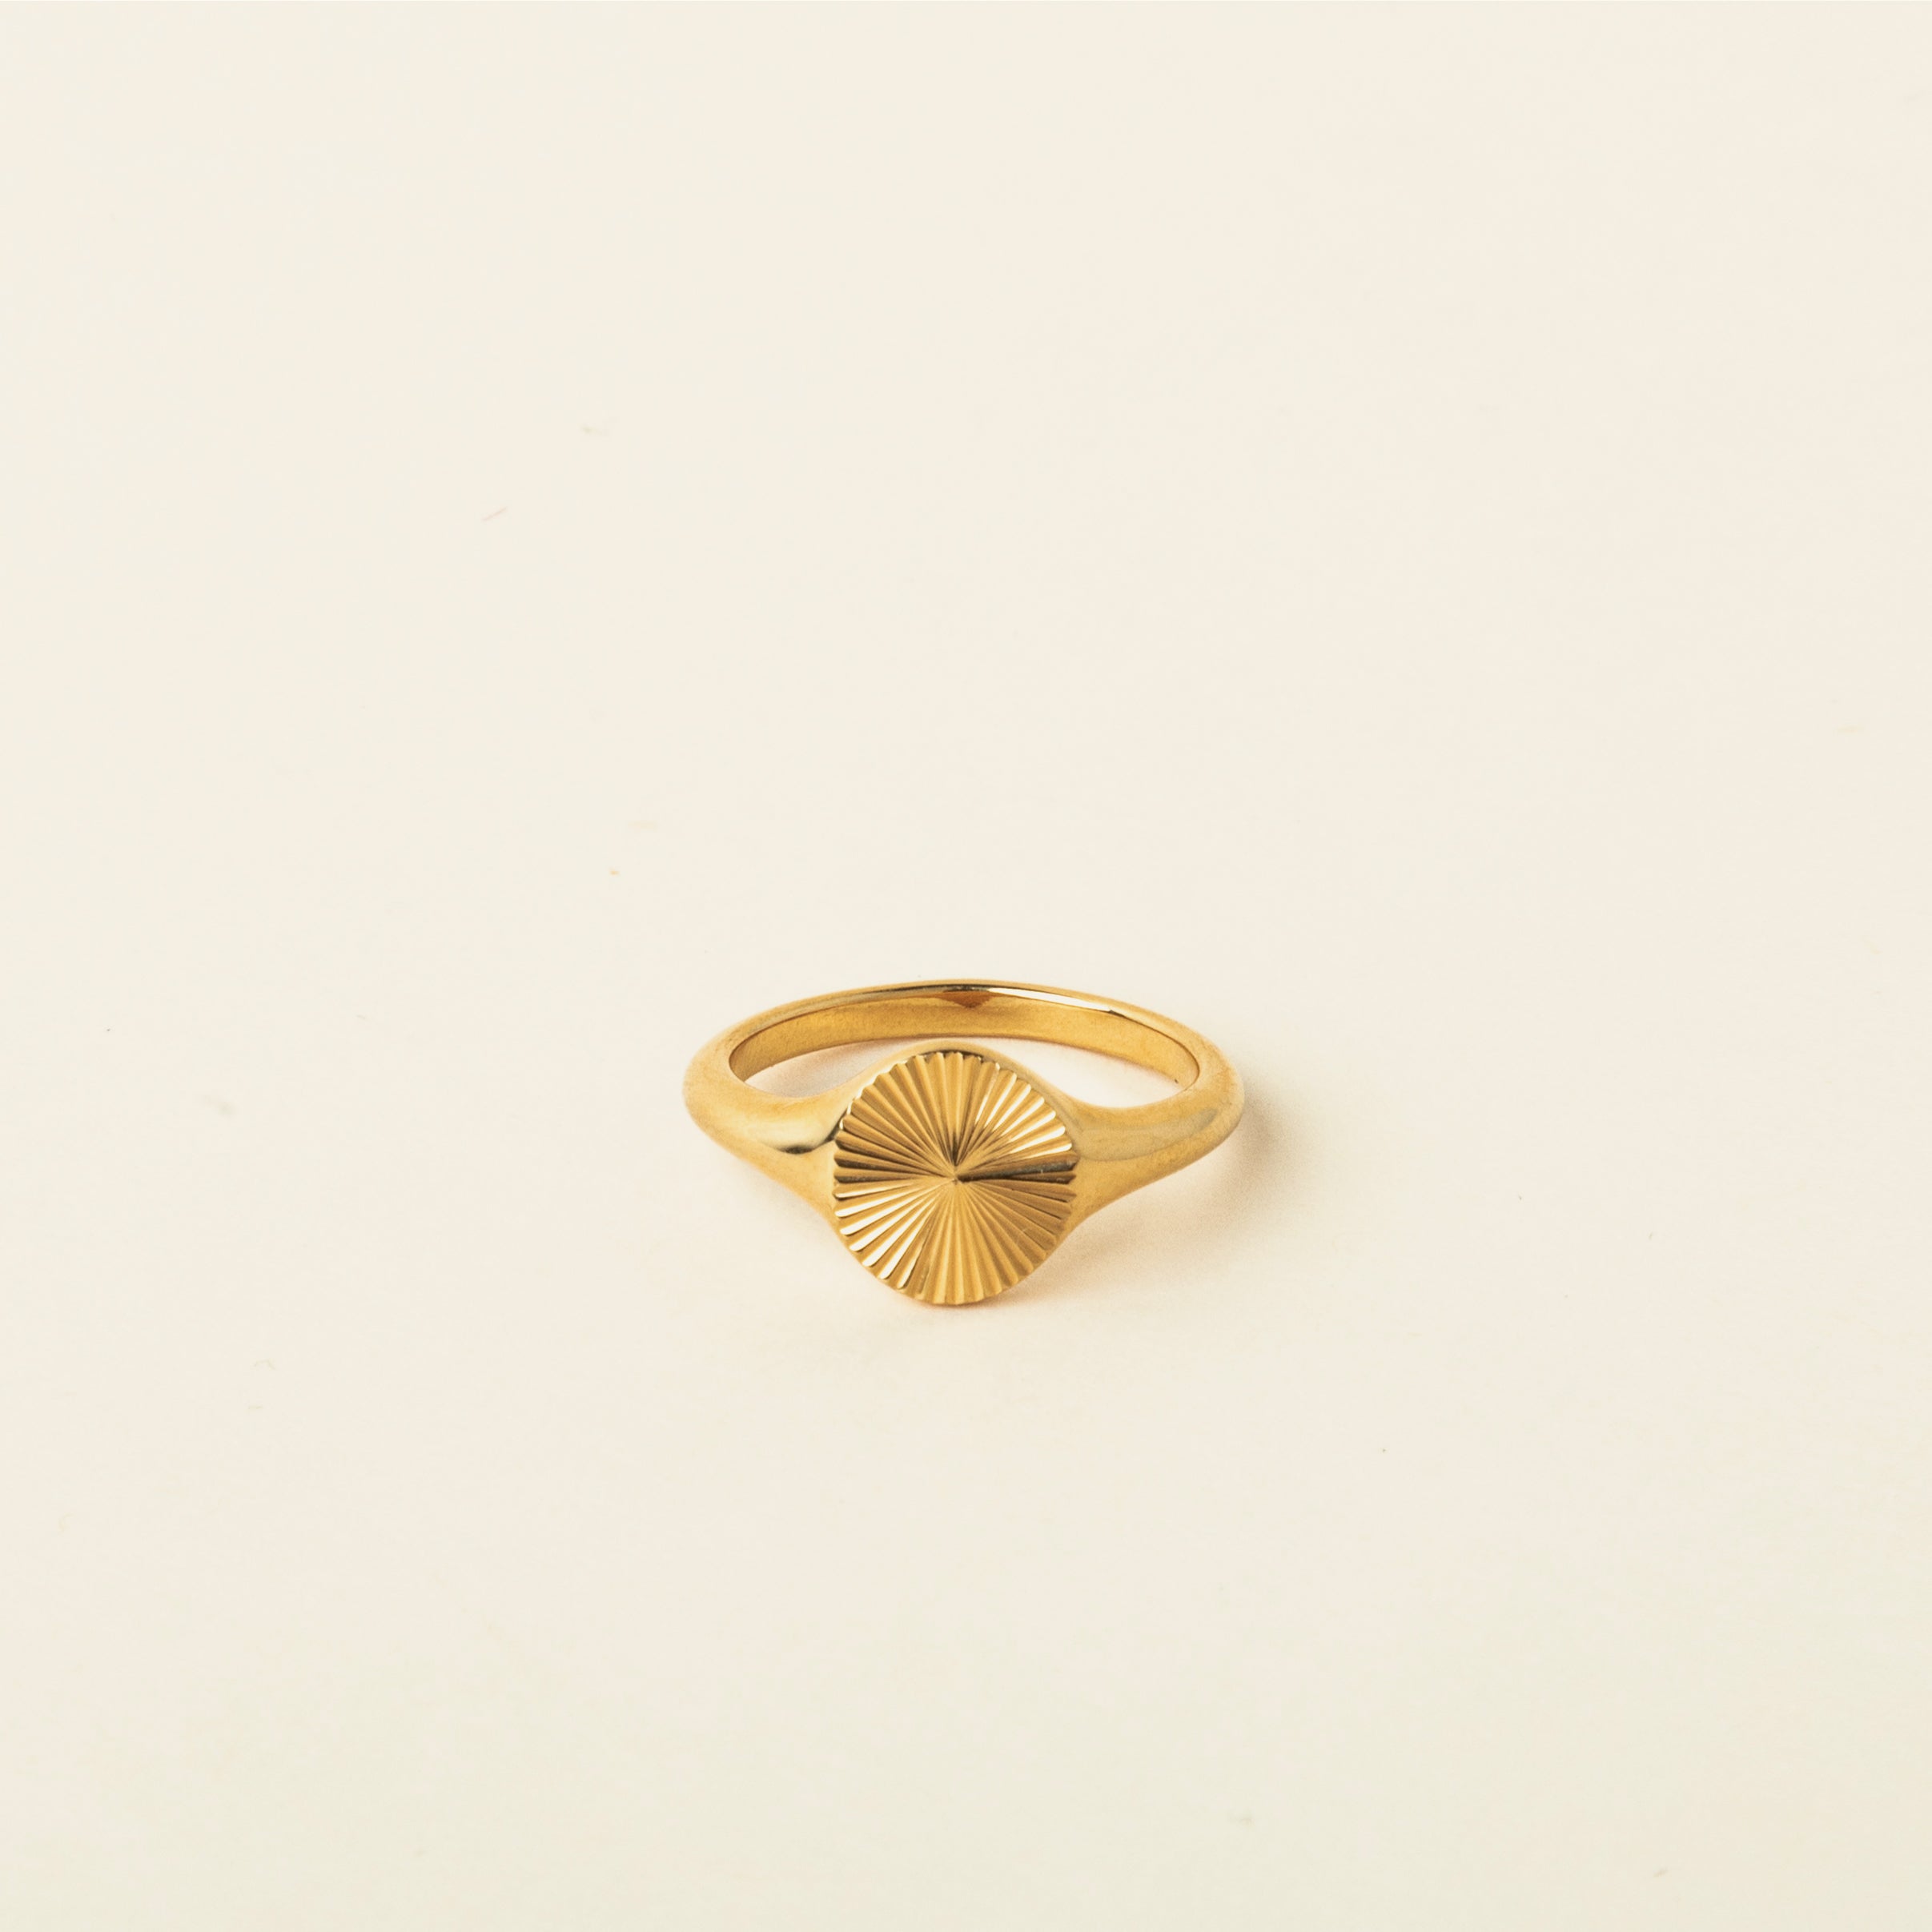 Image of the Sunbeam Ring is crafted out of 18K Gold Plated Stainless Steel, providing a non-tarnishing and water-resistant material. Please note, this ring is sold as a single item.